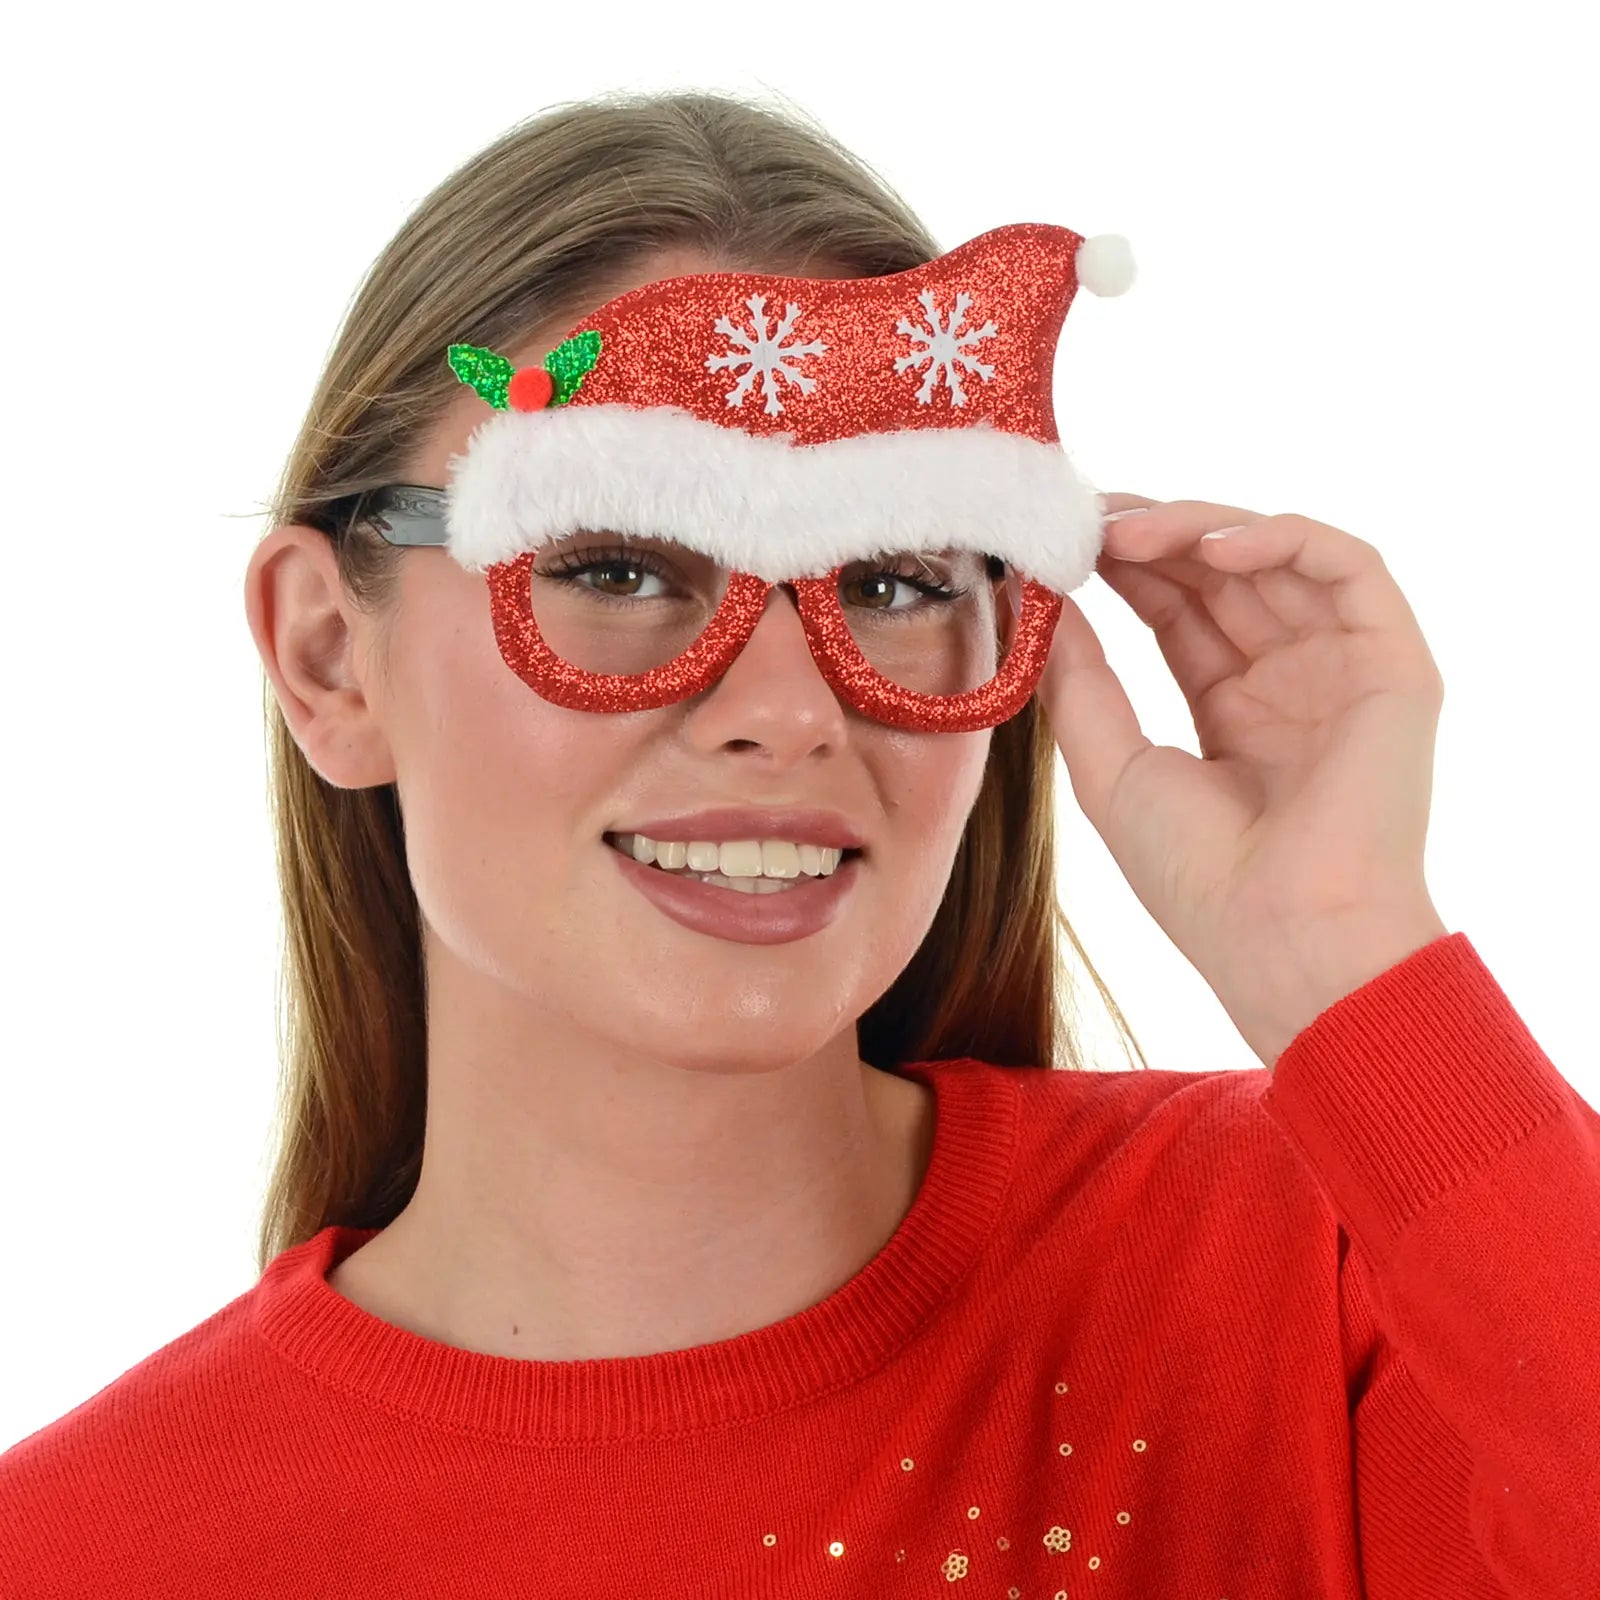 model wears red glitter glasses designed like santa claus hat and finished with snowflake details and faux fur fluffy trim